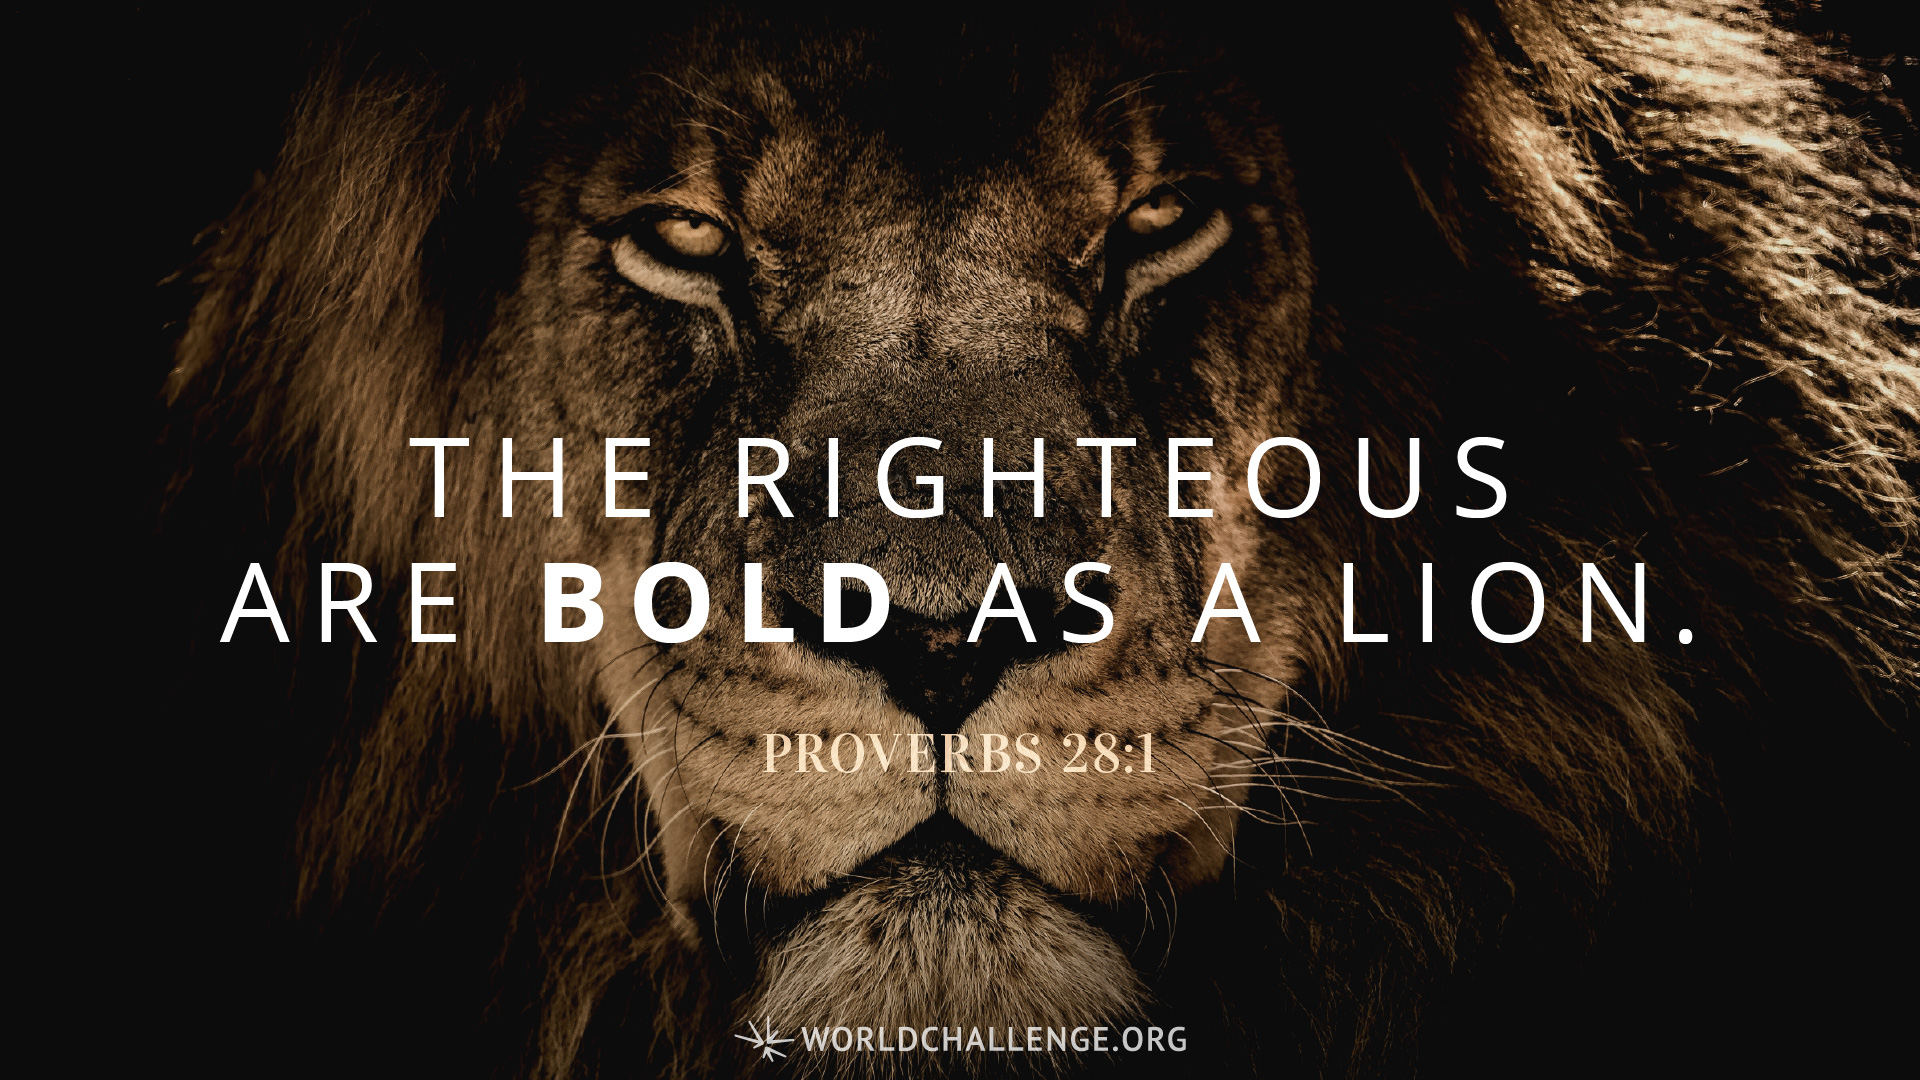 Proverbs 281   The wicked flee when no one pursues, but the righteous are bold as a lion